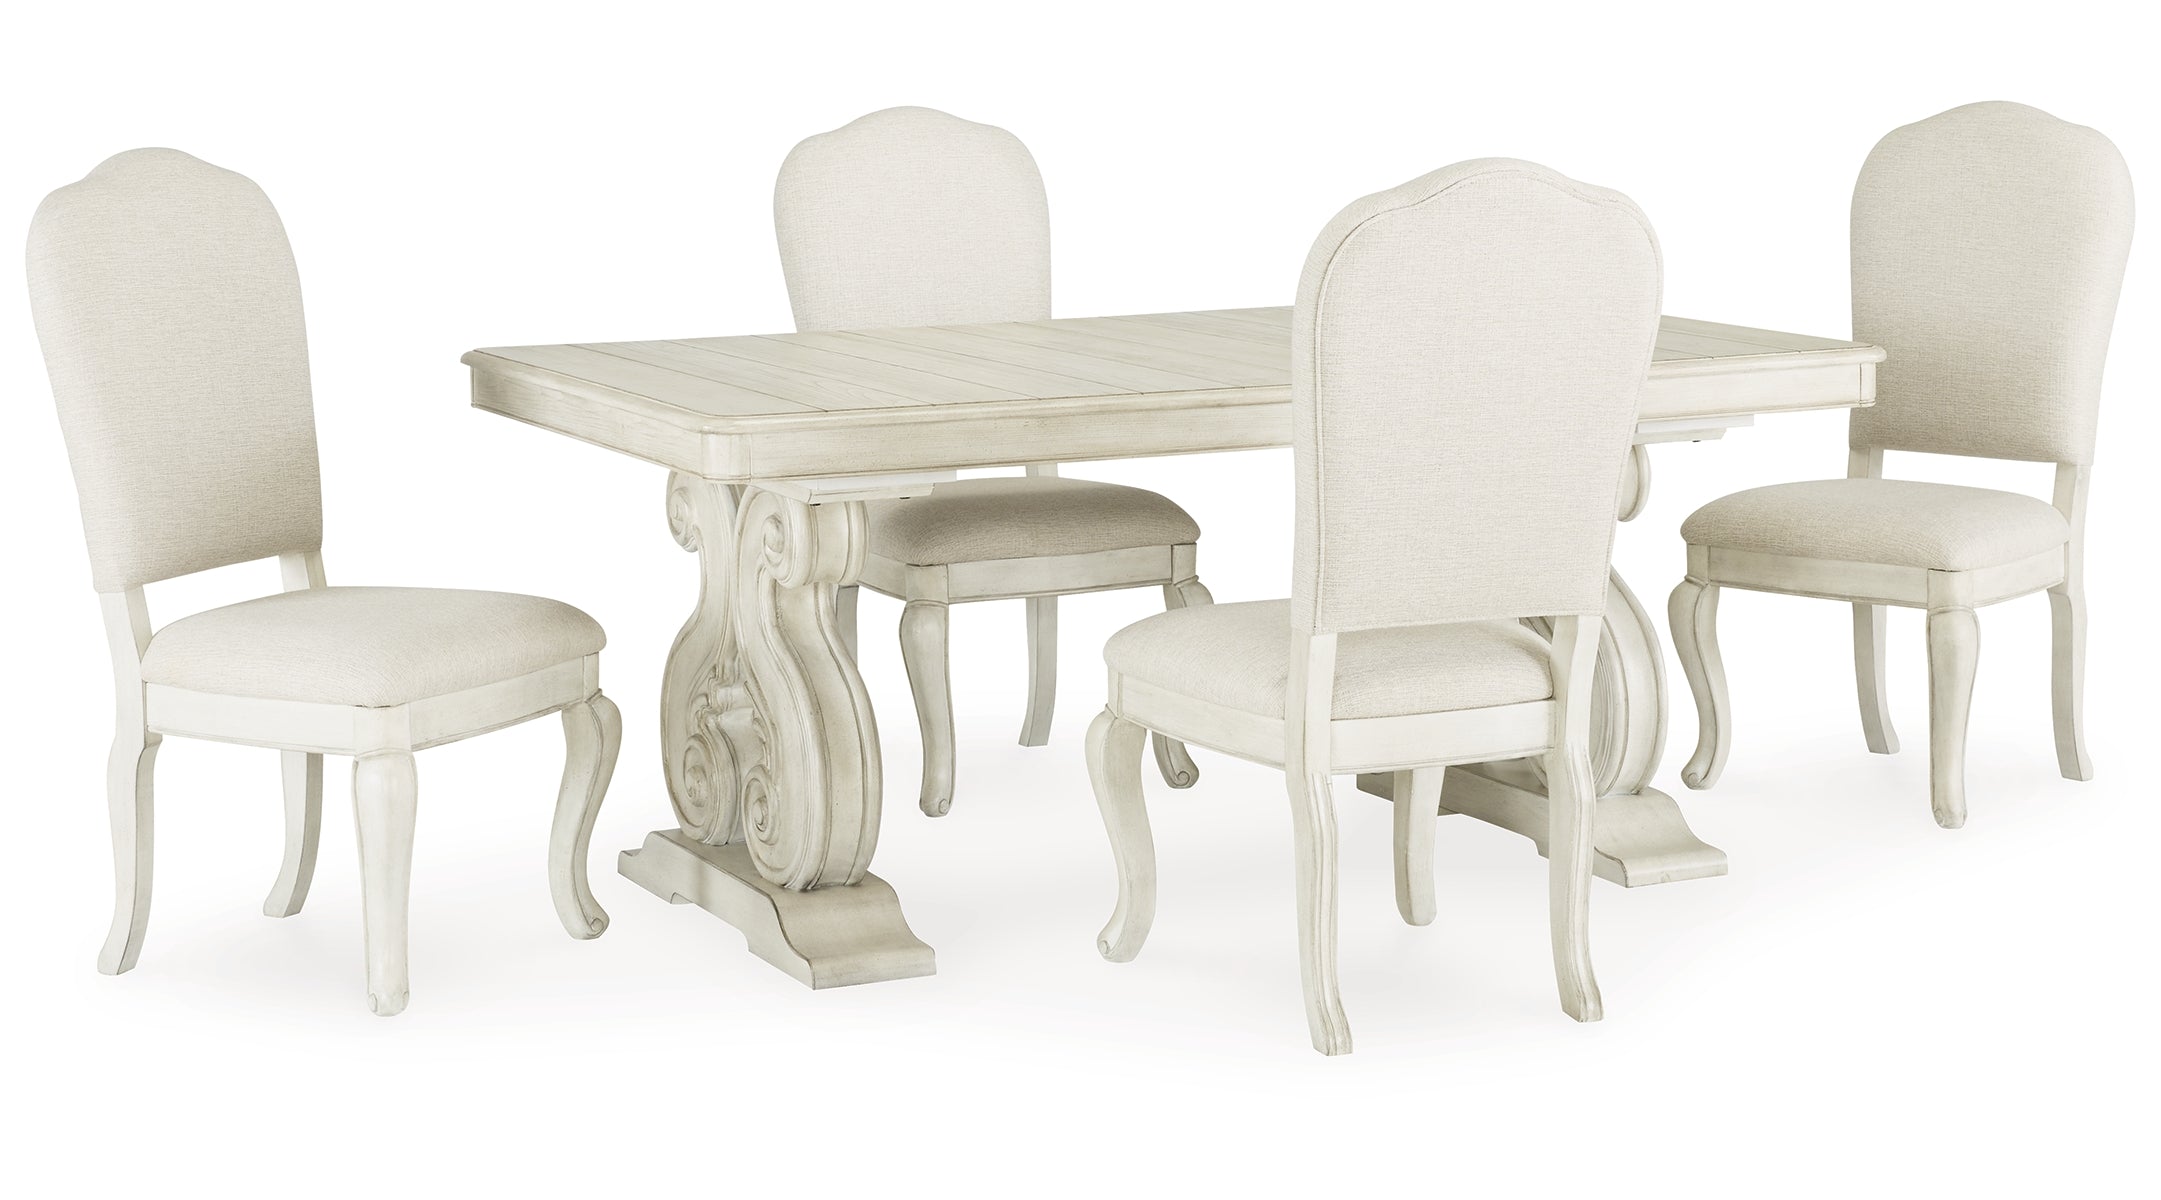 Arlendyne Dining Table and 4 Chairs